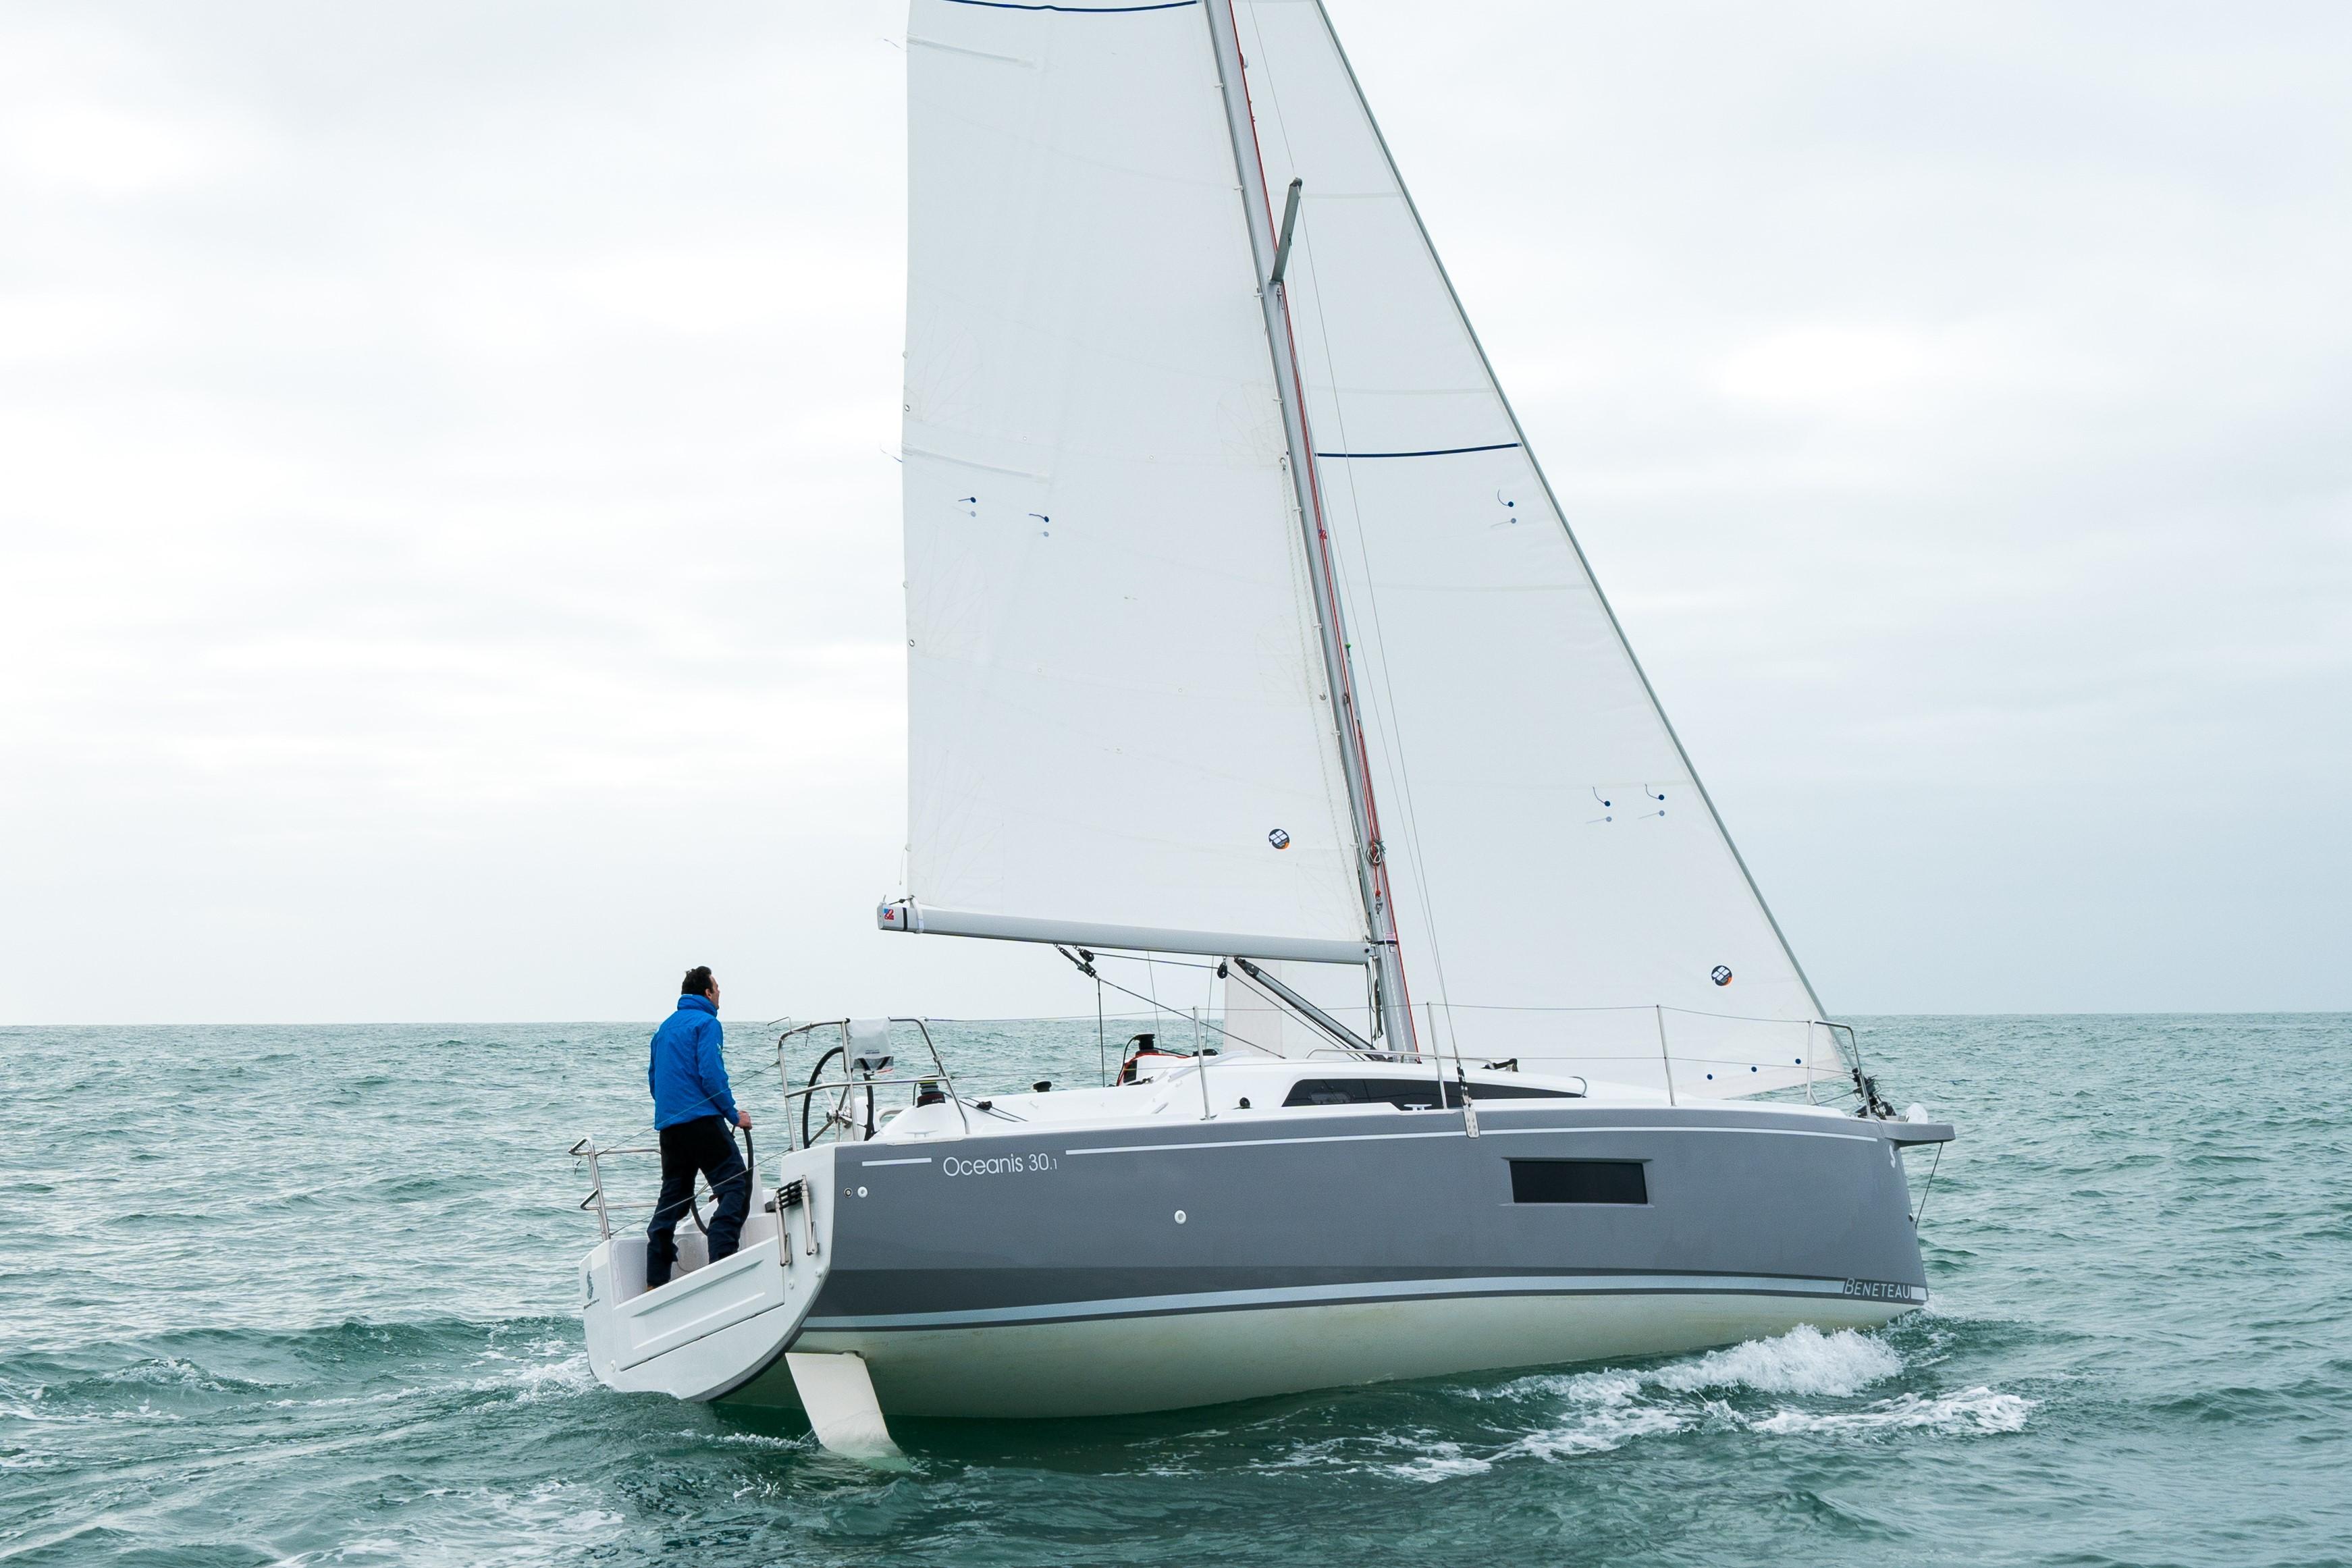 View pictures and details of this boat or search for more Beneteau boats fo...